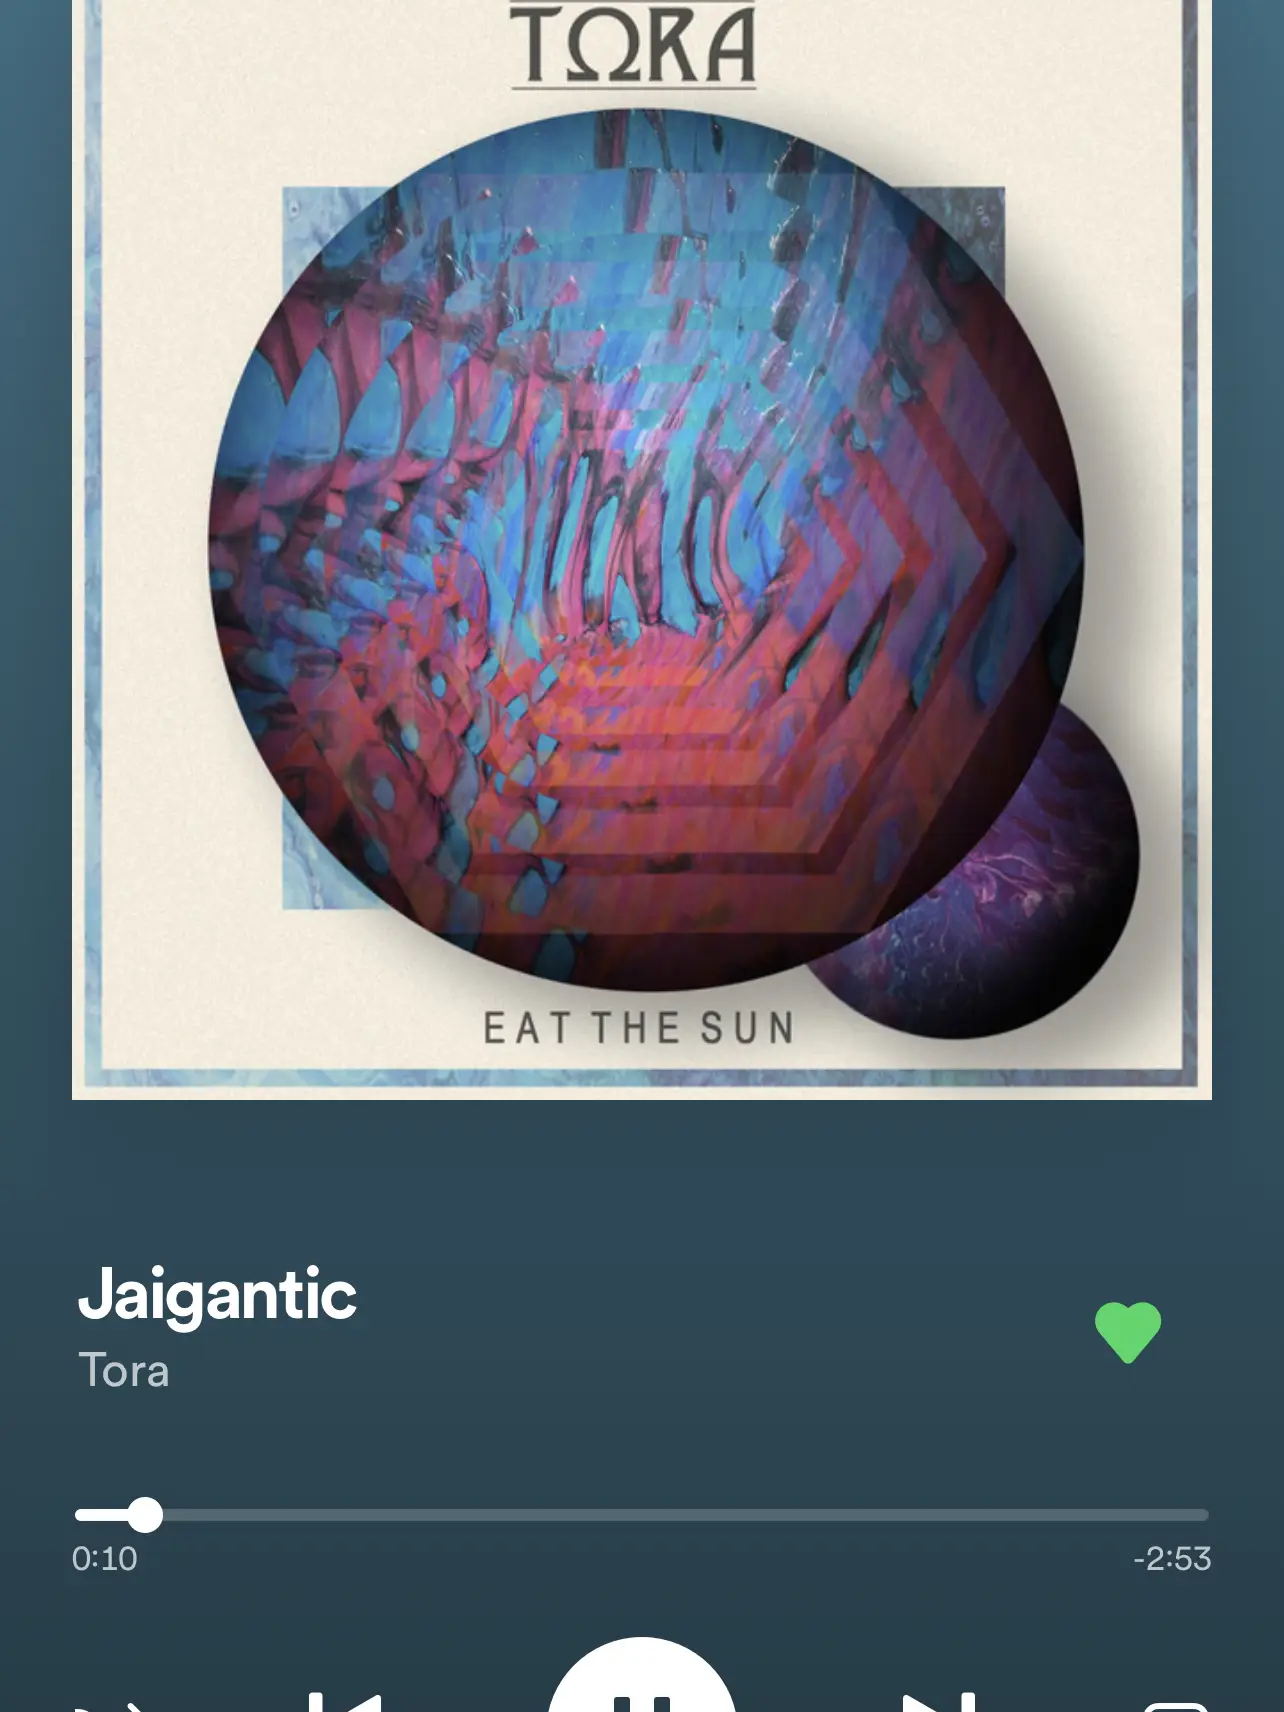  A song with a colorful background and the words "eat the sun" written on it.